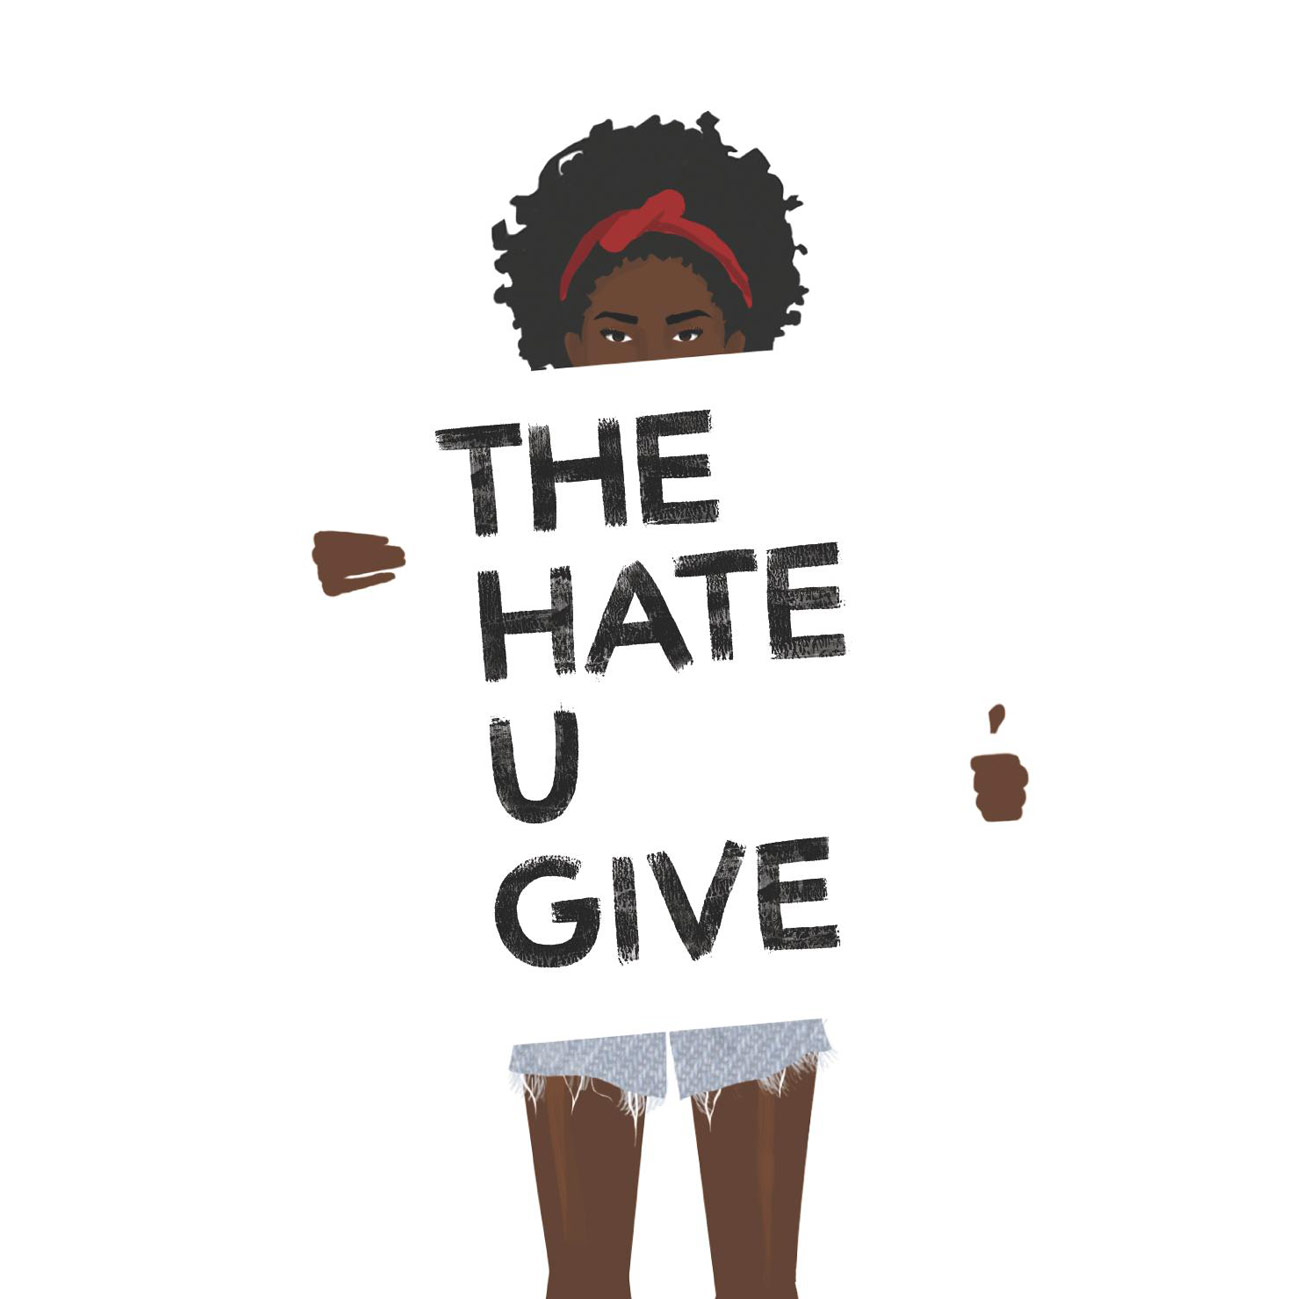 Episode 11: The Hate U Give